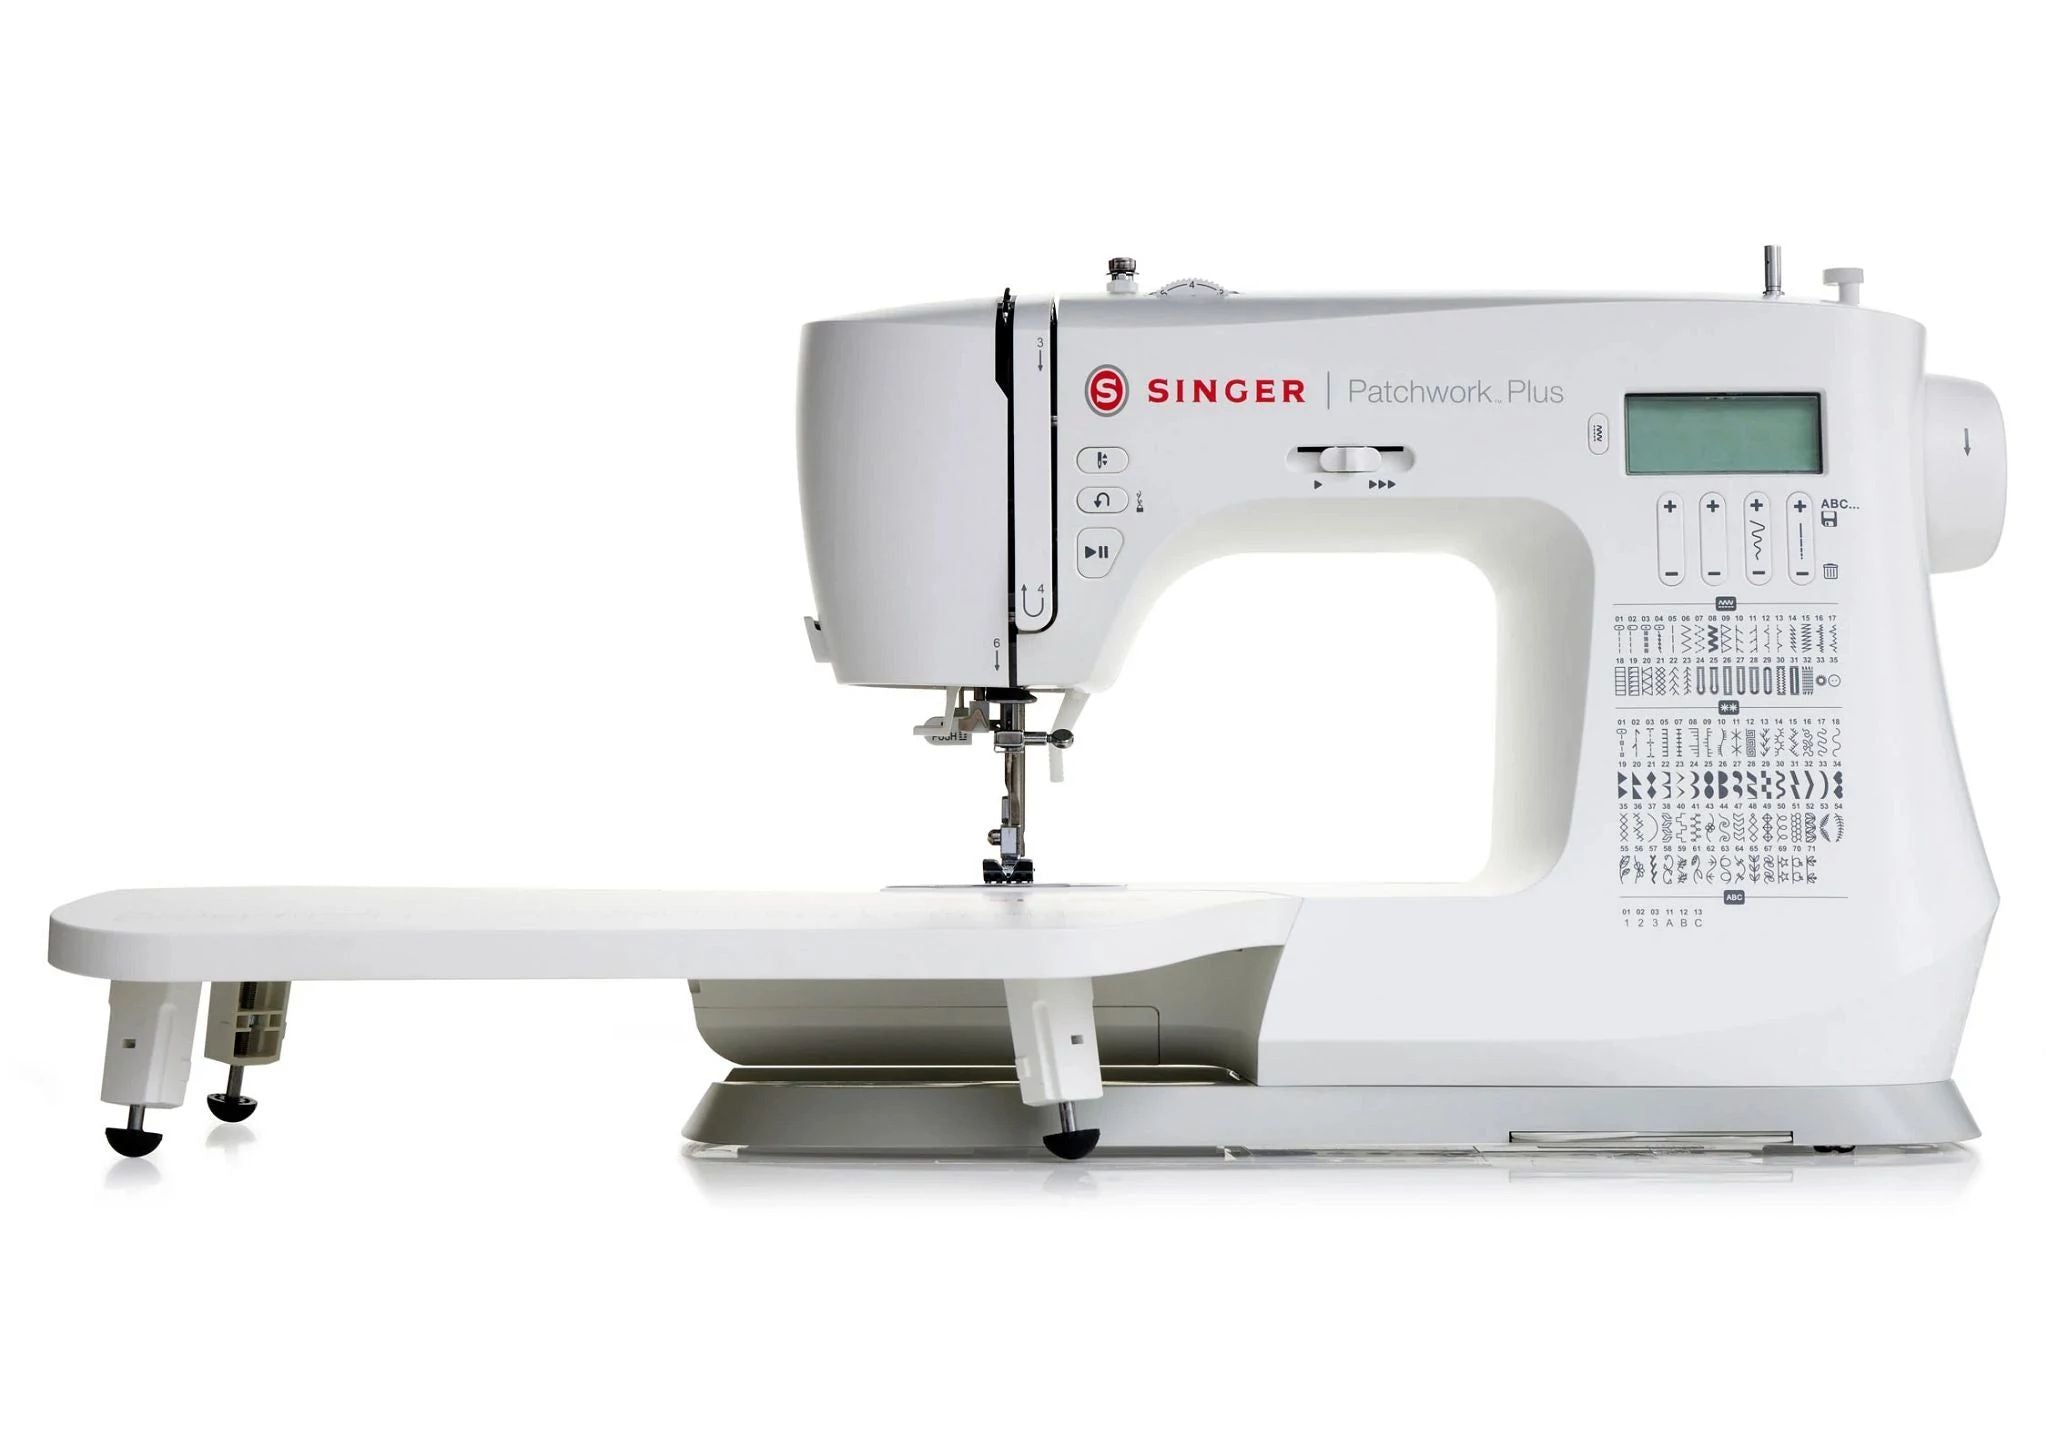 Singer Patchwork Plus C5985Q Sewing Machine - 200 stitch patterns with letters and numbers